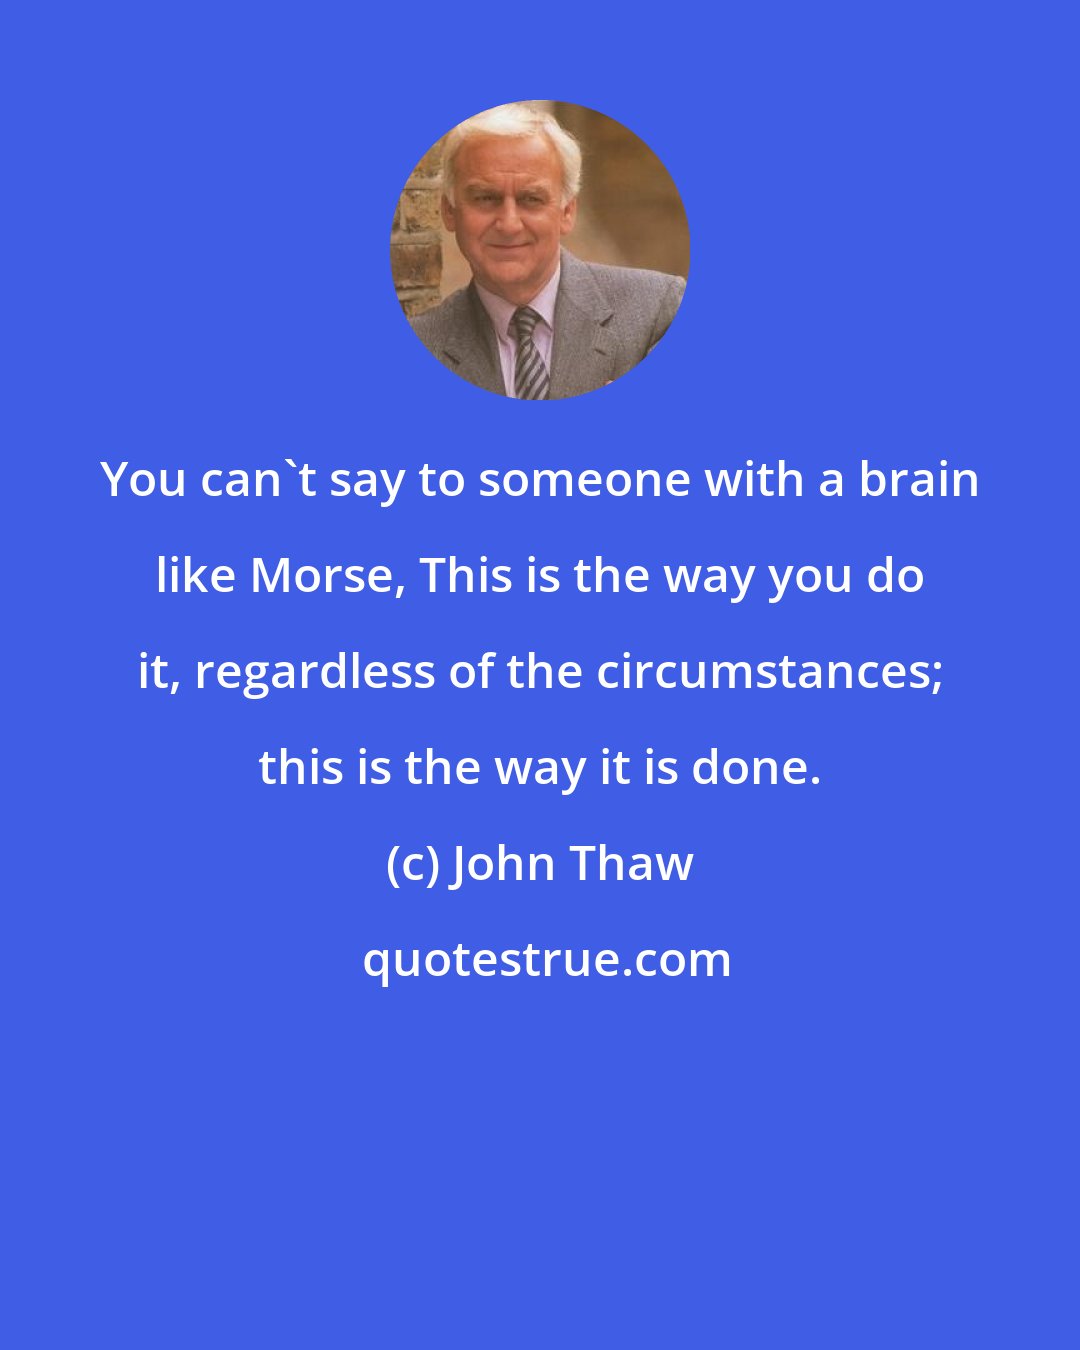 John Thaw: You can't say to someone with a brain like Morse, This is the way you do it, regardless of the circumstances; this is the way it is done.